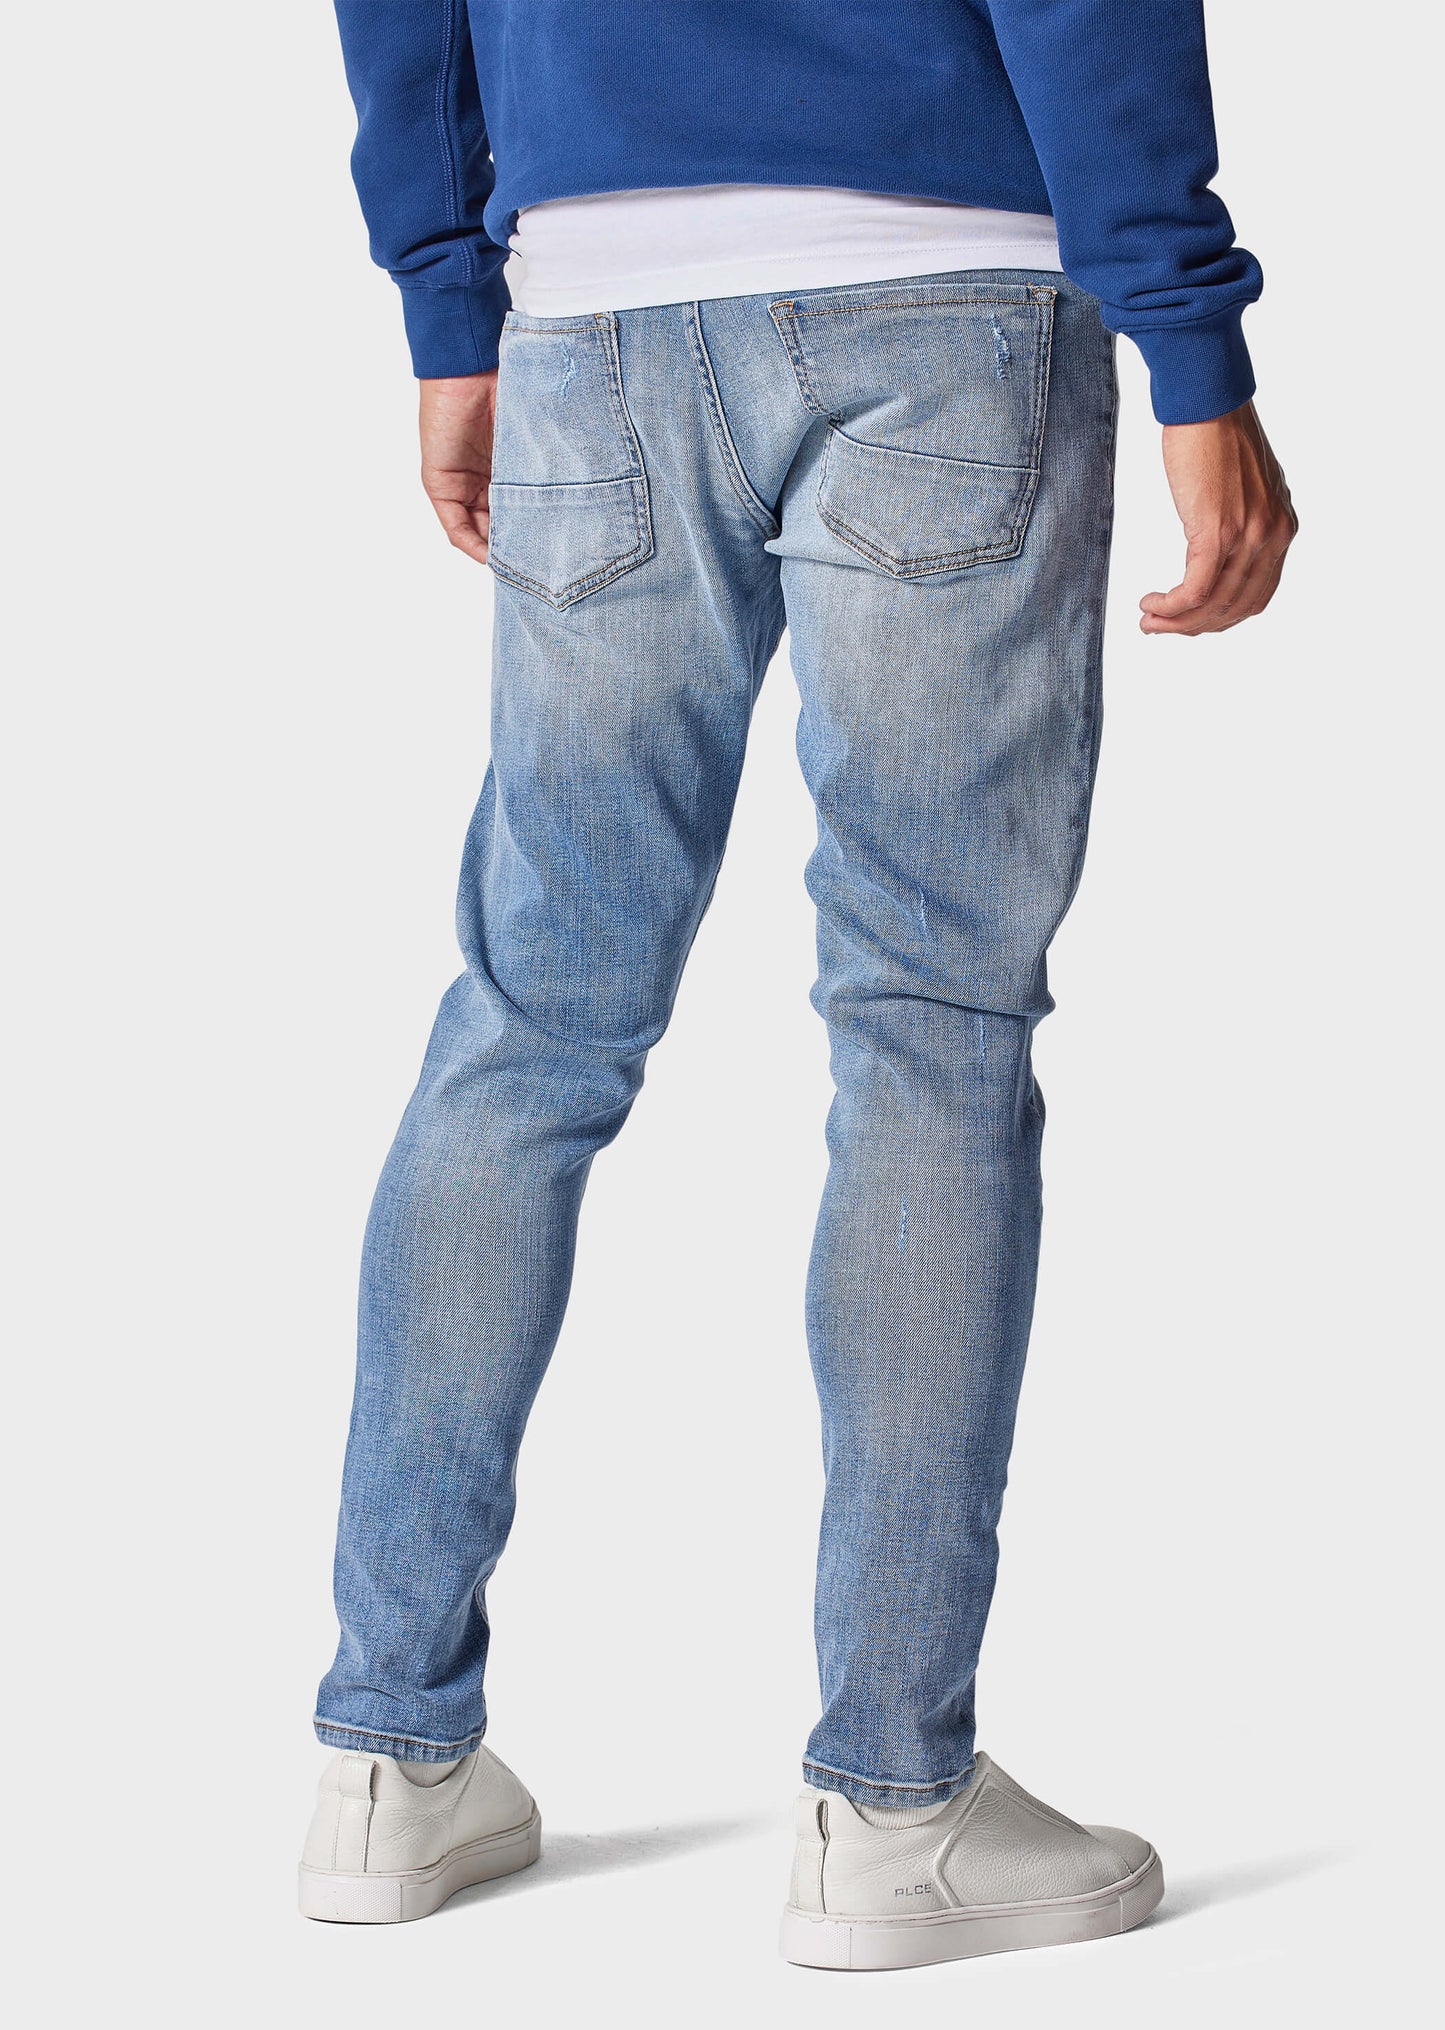 Moriarty COB 870 Slim Fit Jeans